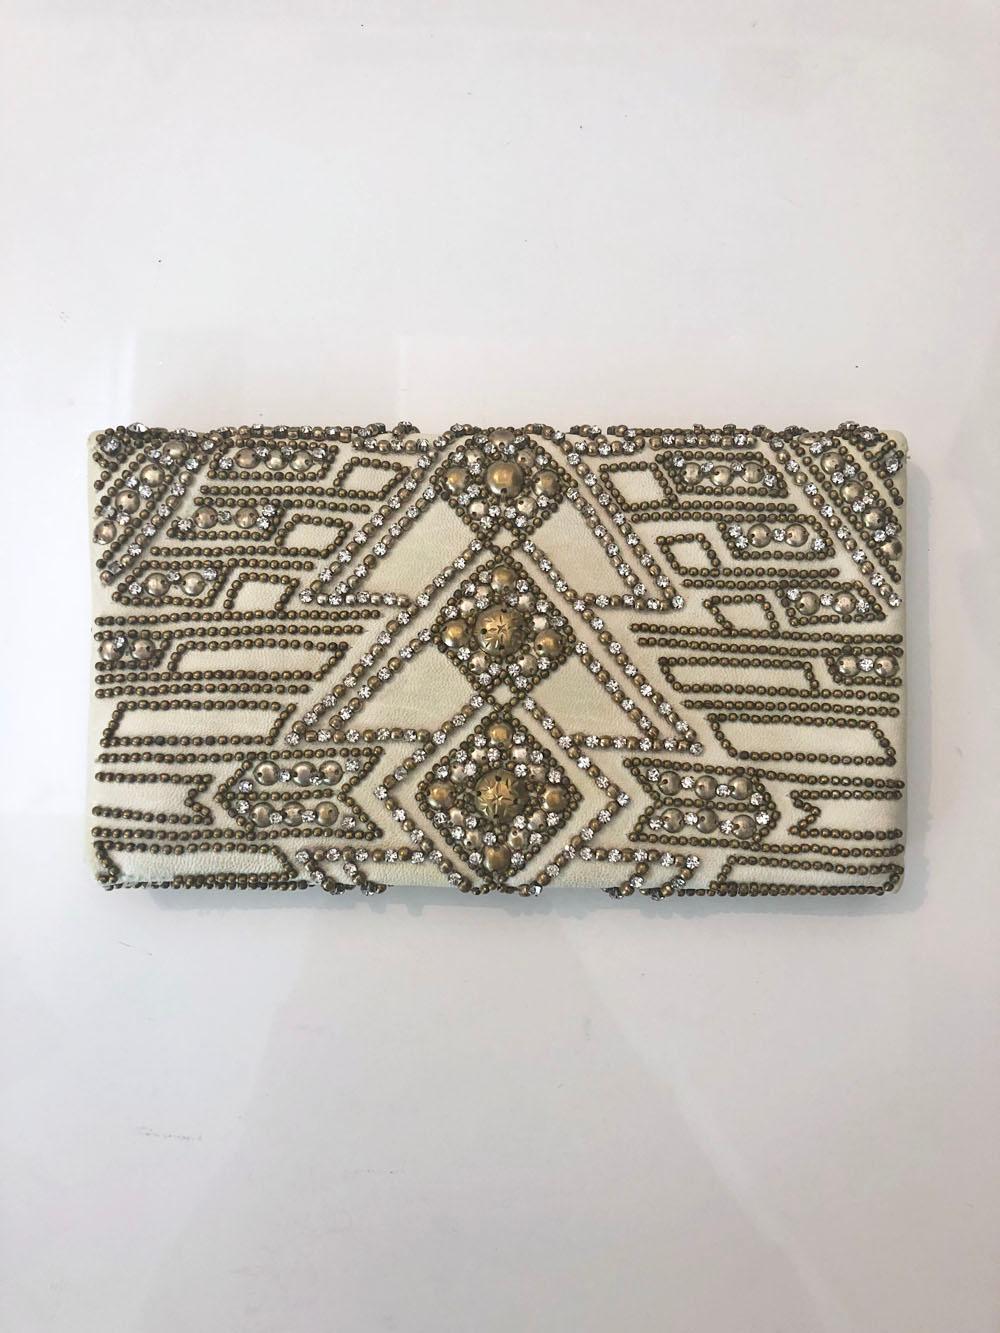 Cream buttery leather envelope clutch by Balmain embellished with studs, beads, and rhinestones. This item has been cleaned and is in excellent condition! 

